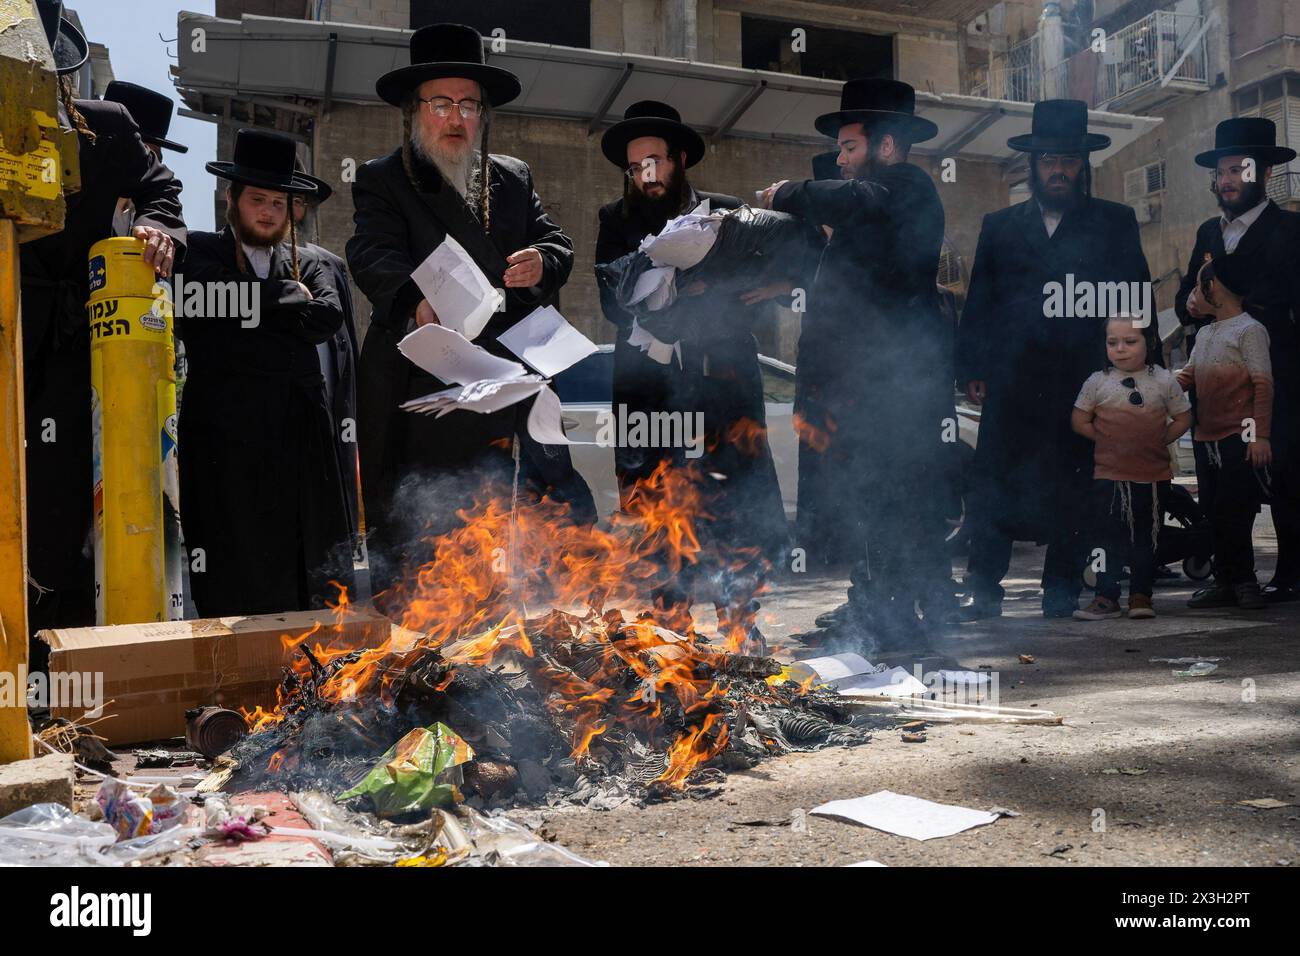 A Jewish Rabbi is seen throwing papers to the fire. During the Biur Chametz, religious Jews fulfill their obligation to inspect their homes for any leaven and eliminate it before the night of Passover. In ultra-Orthodox cities in Israel, fires are set up in major locations in the city for this purpose, where people bring their bread leftovers to burn the leaven. During the seven days of Passover, they are prohibited from eating or possessing any leaven, symbolizing the dough the Israelites did not have time to allow to rise before the Exodus from Egypt. Biur Chametz, also known as 'the burning Stock Photo